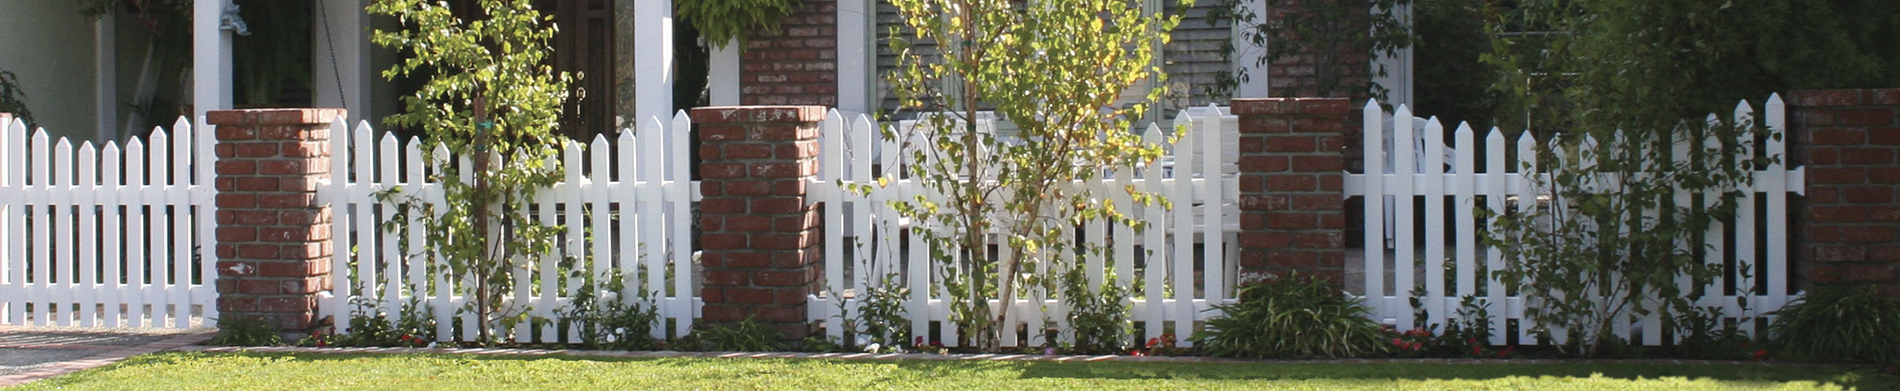 Duramax brings to you a whole range of modern and traditional vinyl fence panel